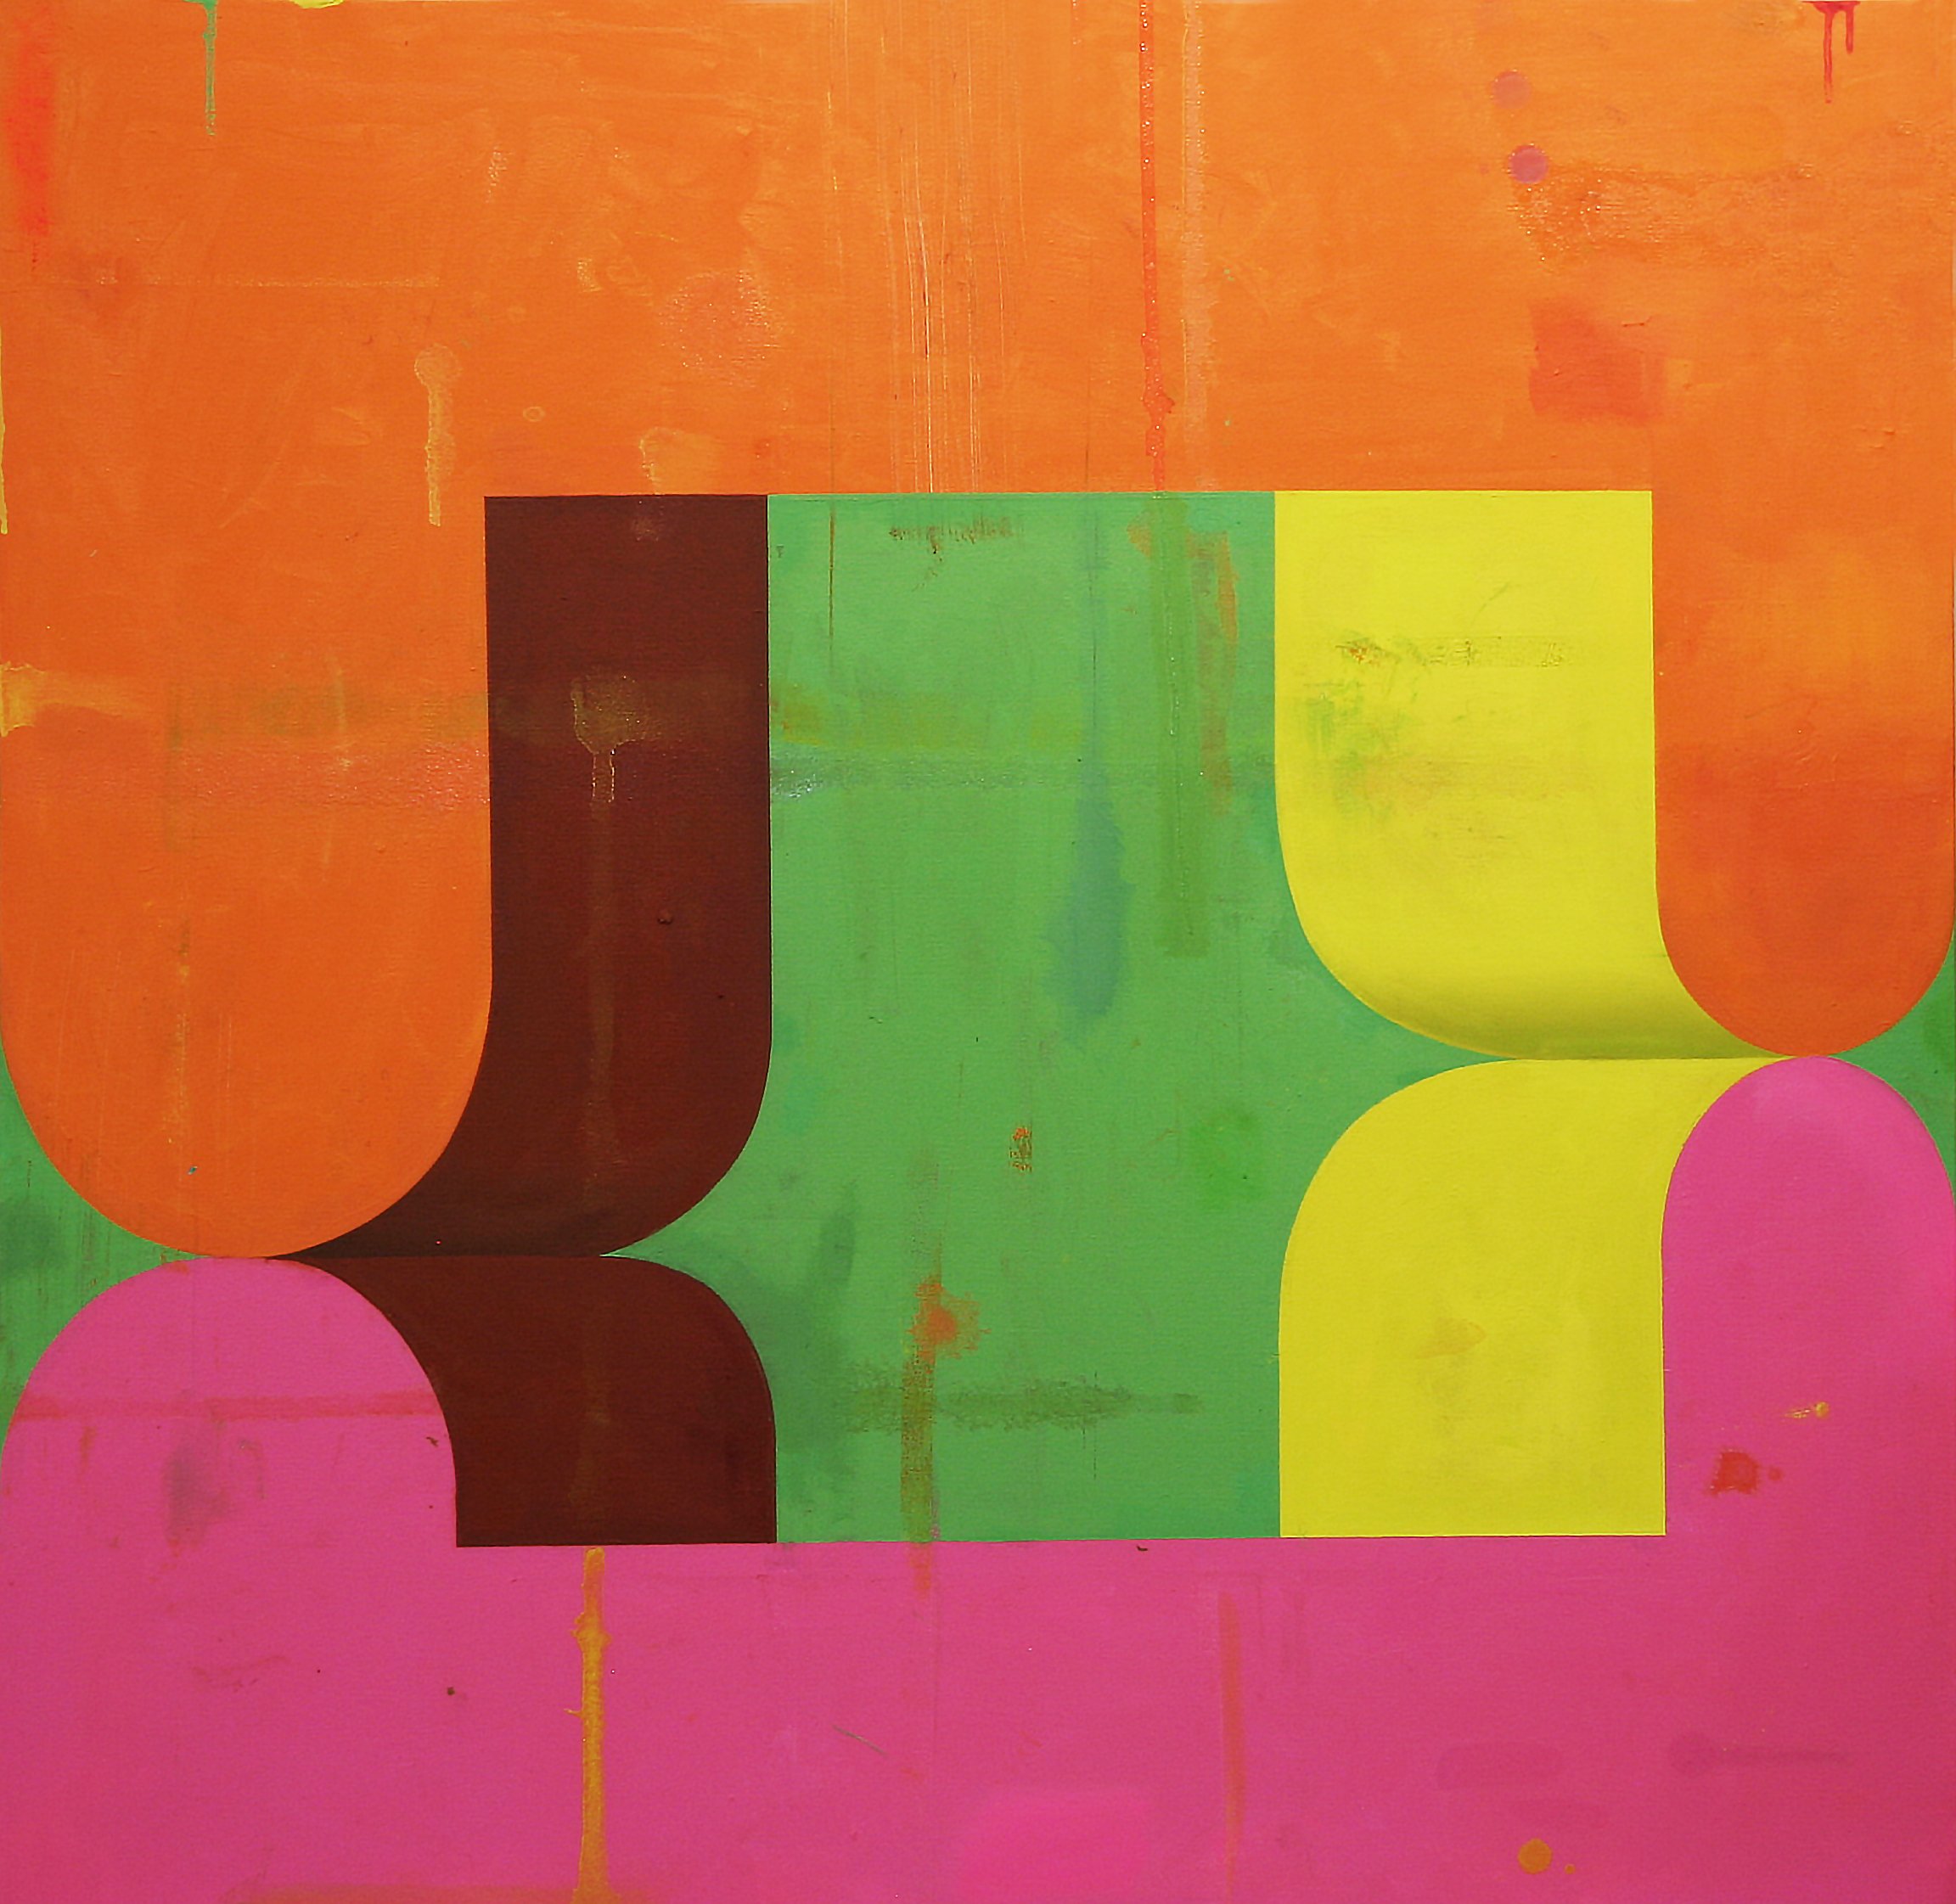    Couple: Orange and Pink  , 2020  Oil on canvas  48 x 48 in. 